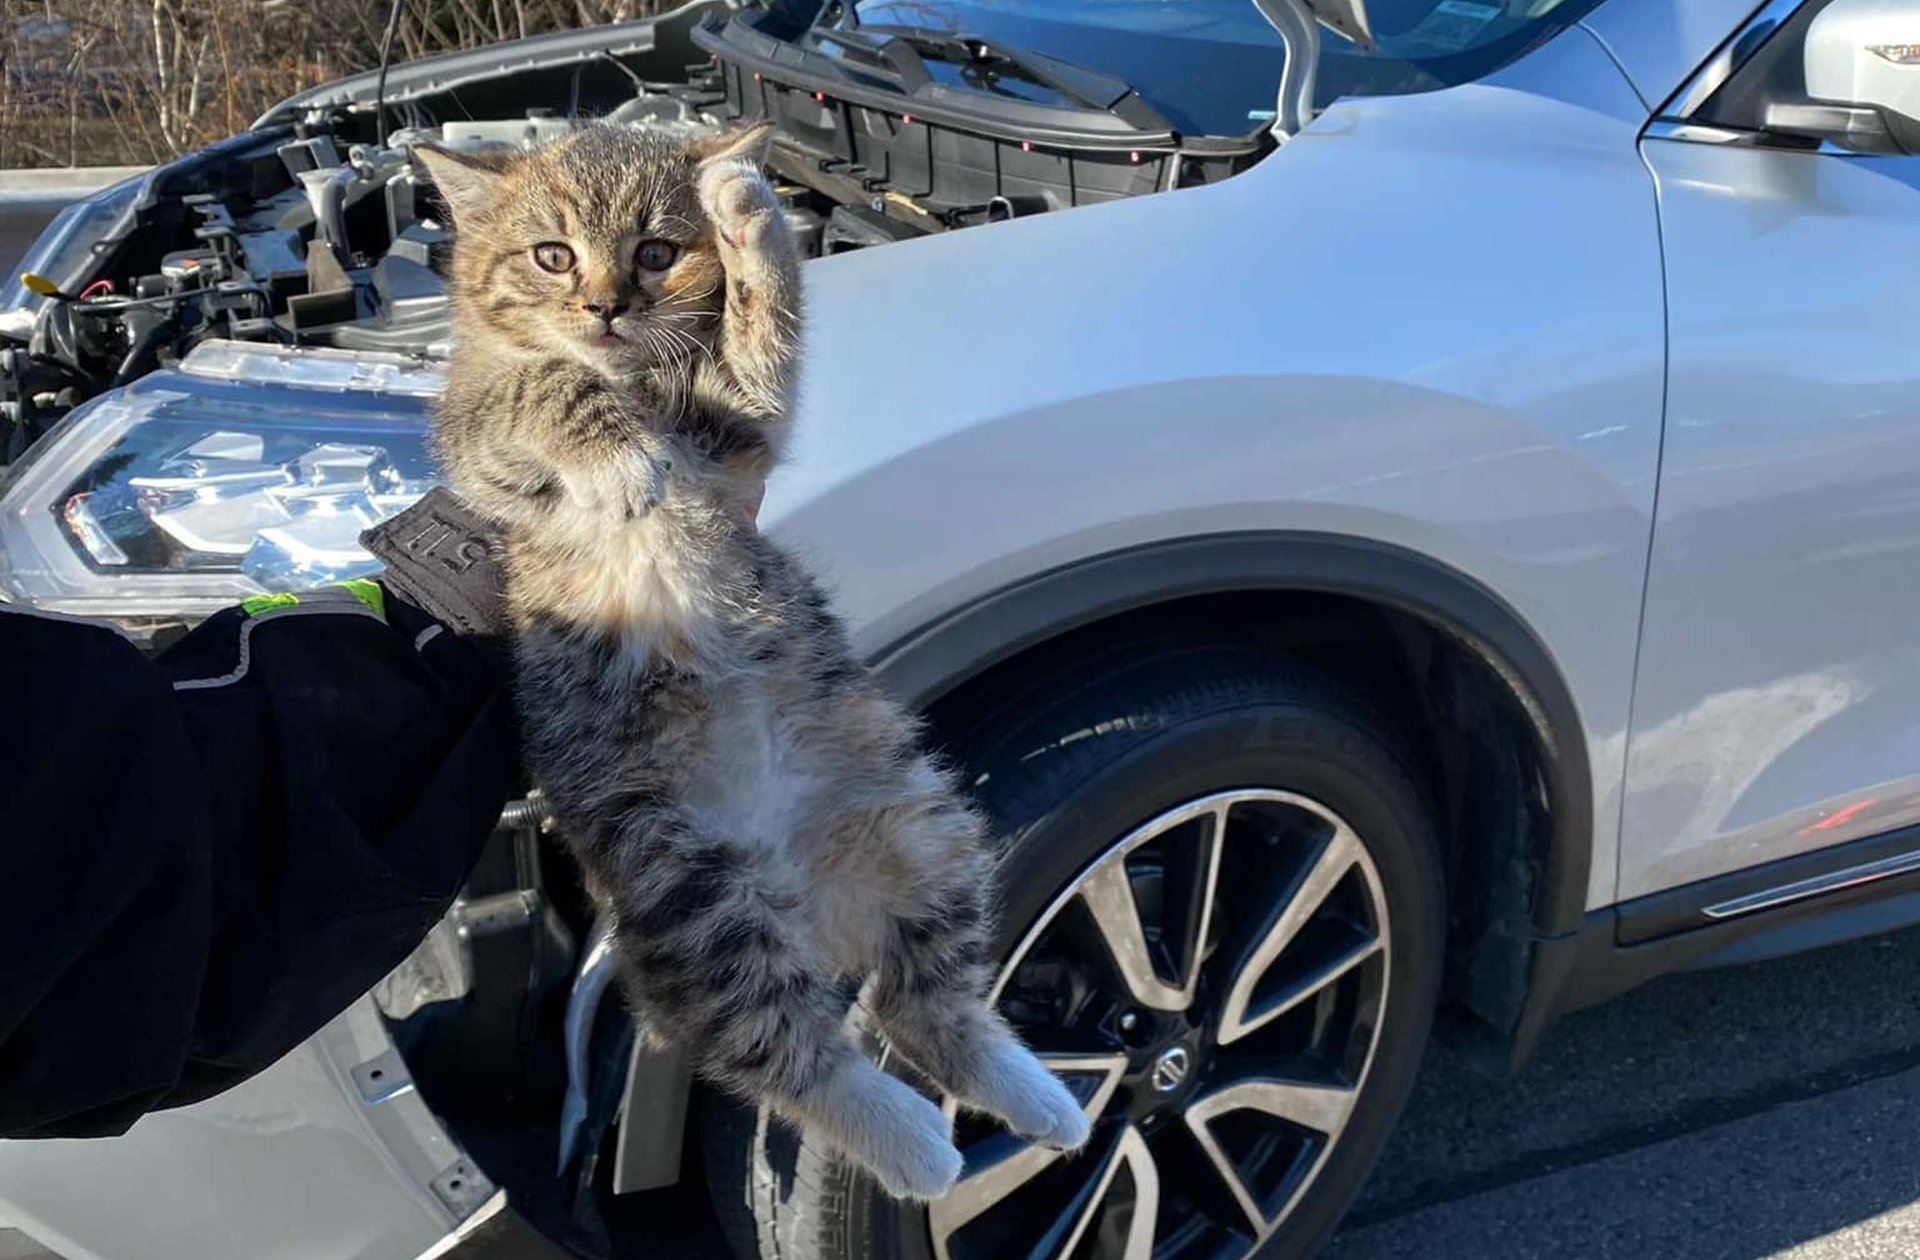 Police officer adopts kitten rescued from car engine in New York